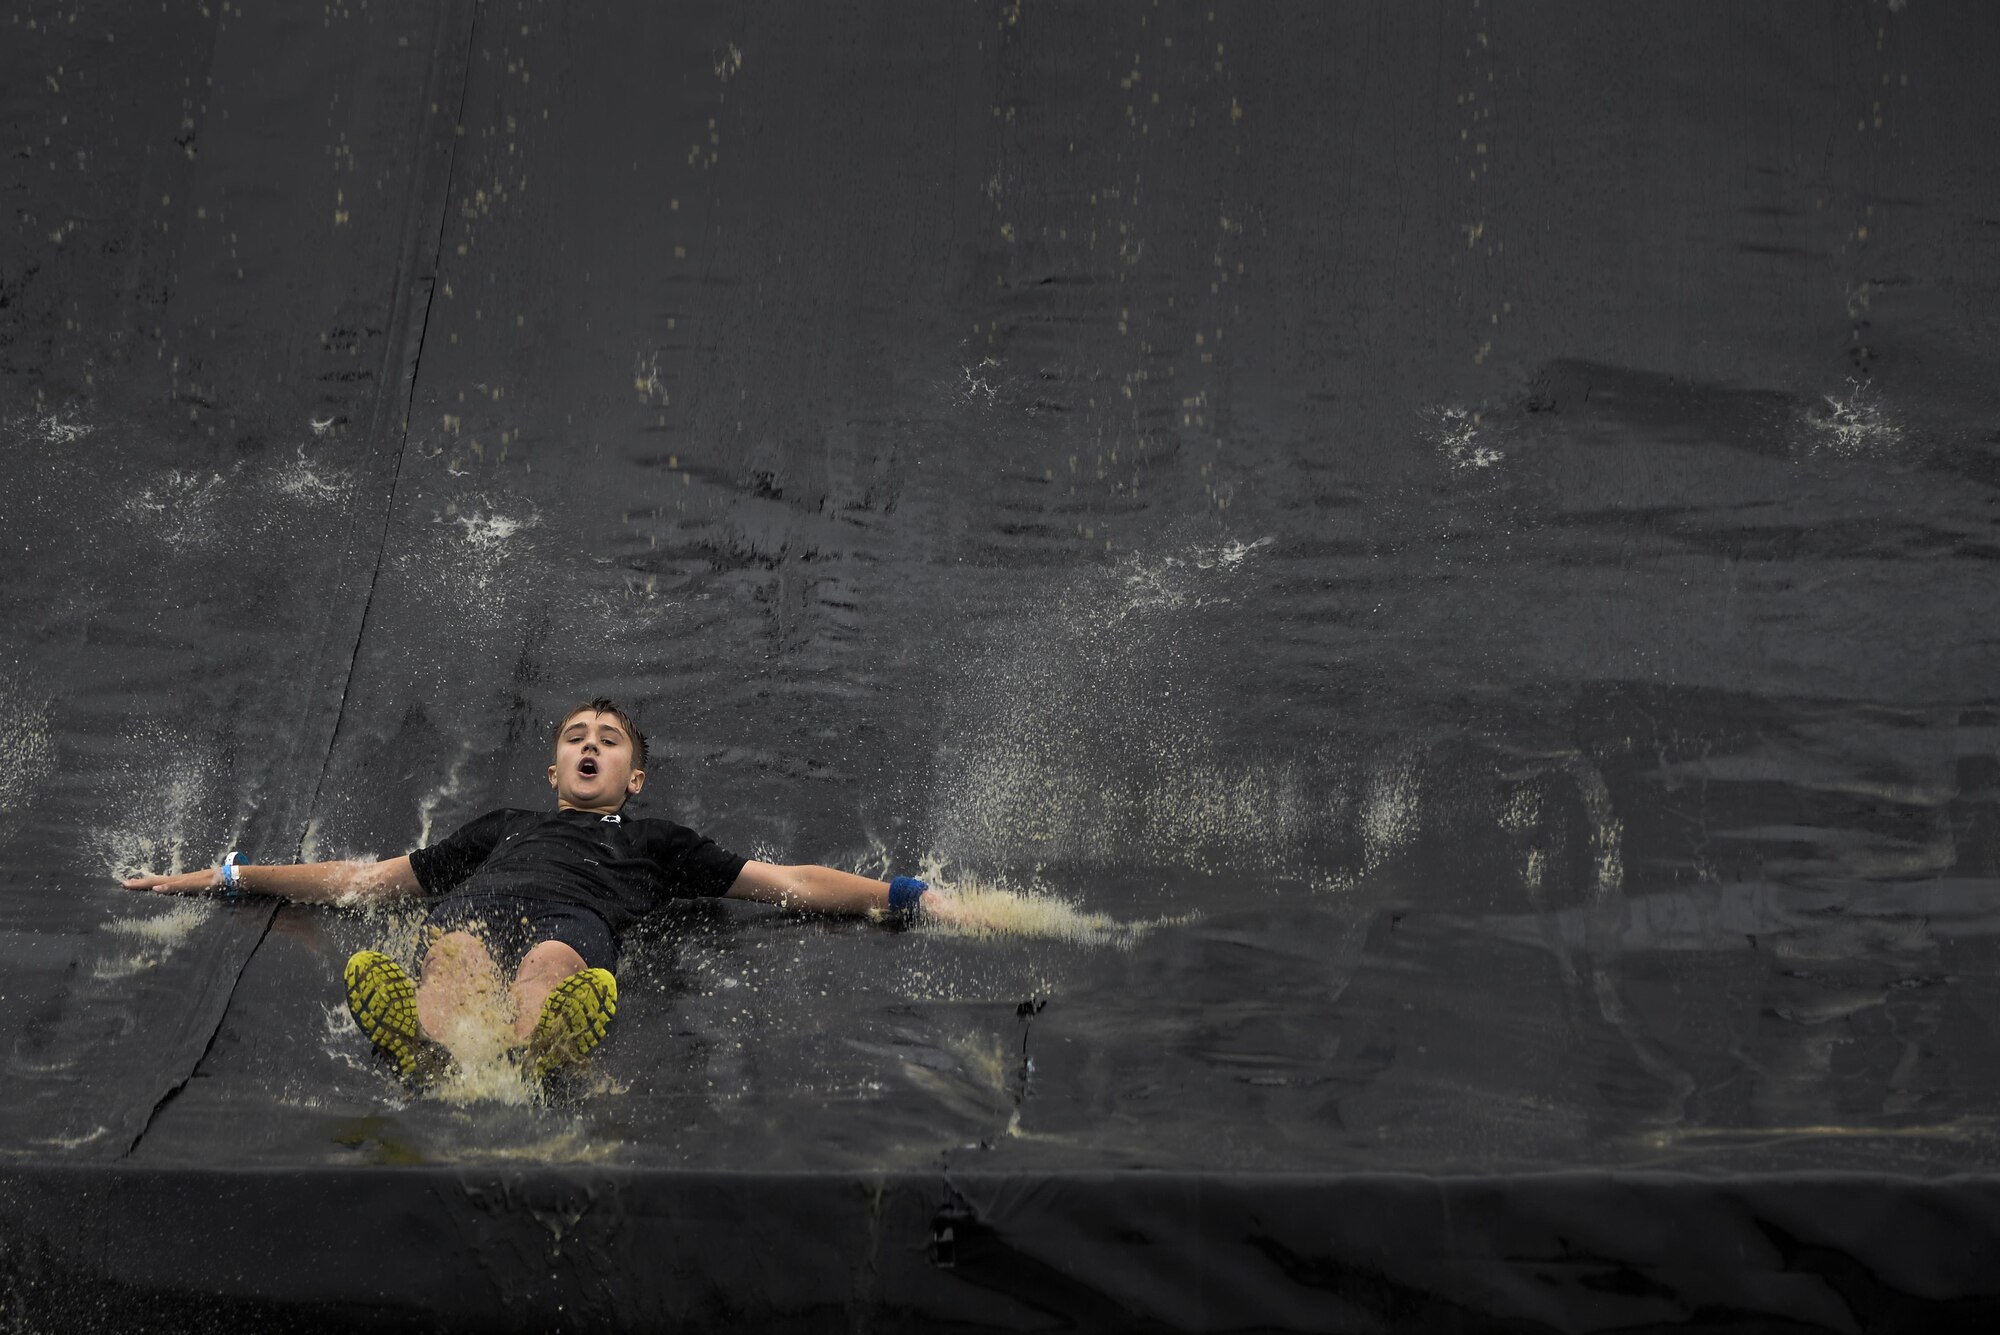 Grant Gillinger slides down a 43-foot water slide after completing ‘Colossus’ a 43-foot quarter pipe wall during the final stages of the 2016 Savage Race October 8, 2016 at Kennedyville, Md. 70th ISRW participants endured a seven-mile obstacle course of cargo net walls, creeks, ice cold water and climbing to test their stamina and strength as a team. (U.S. Air Force photo/Staff Sgt. Alexandre Montes)